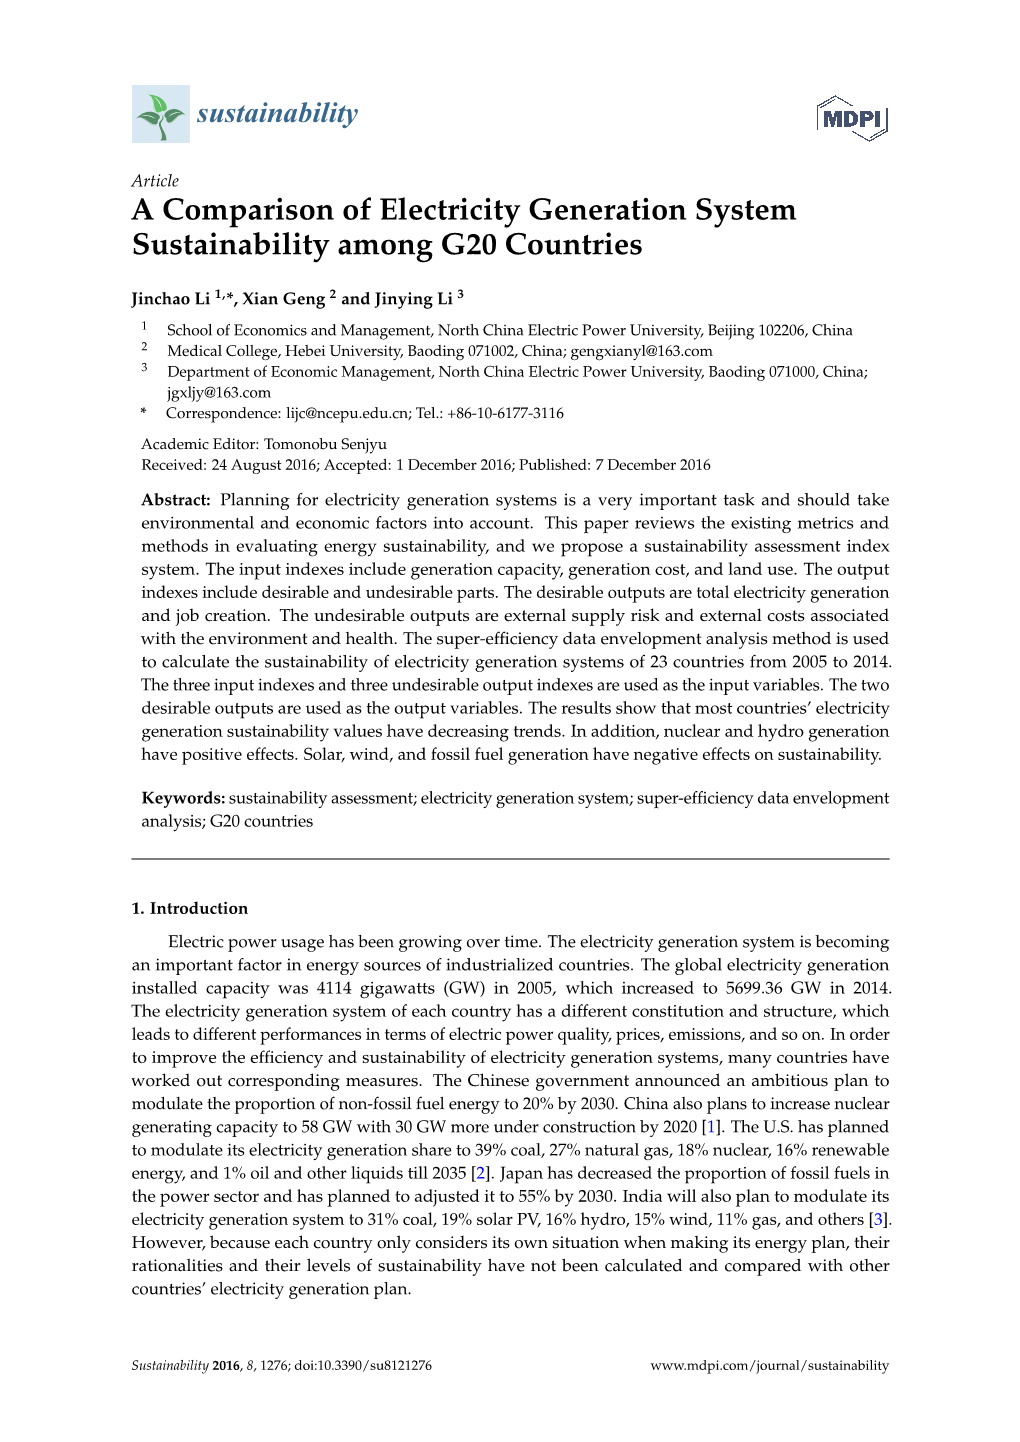 A Comparison of Electricity Generation System Sustainability Among G20 Countries